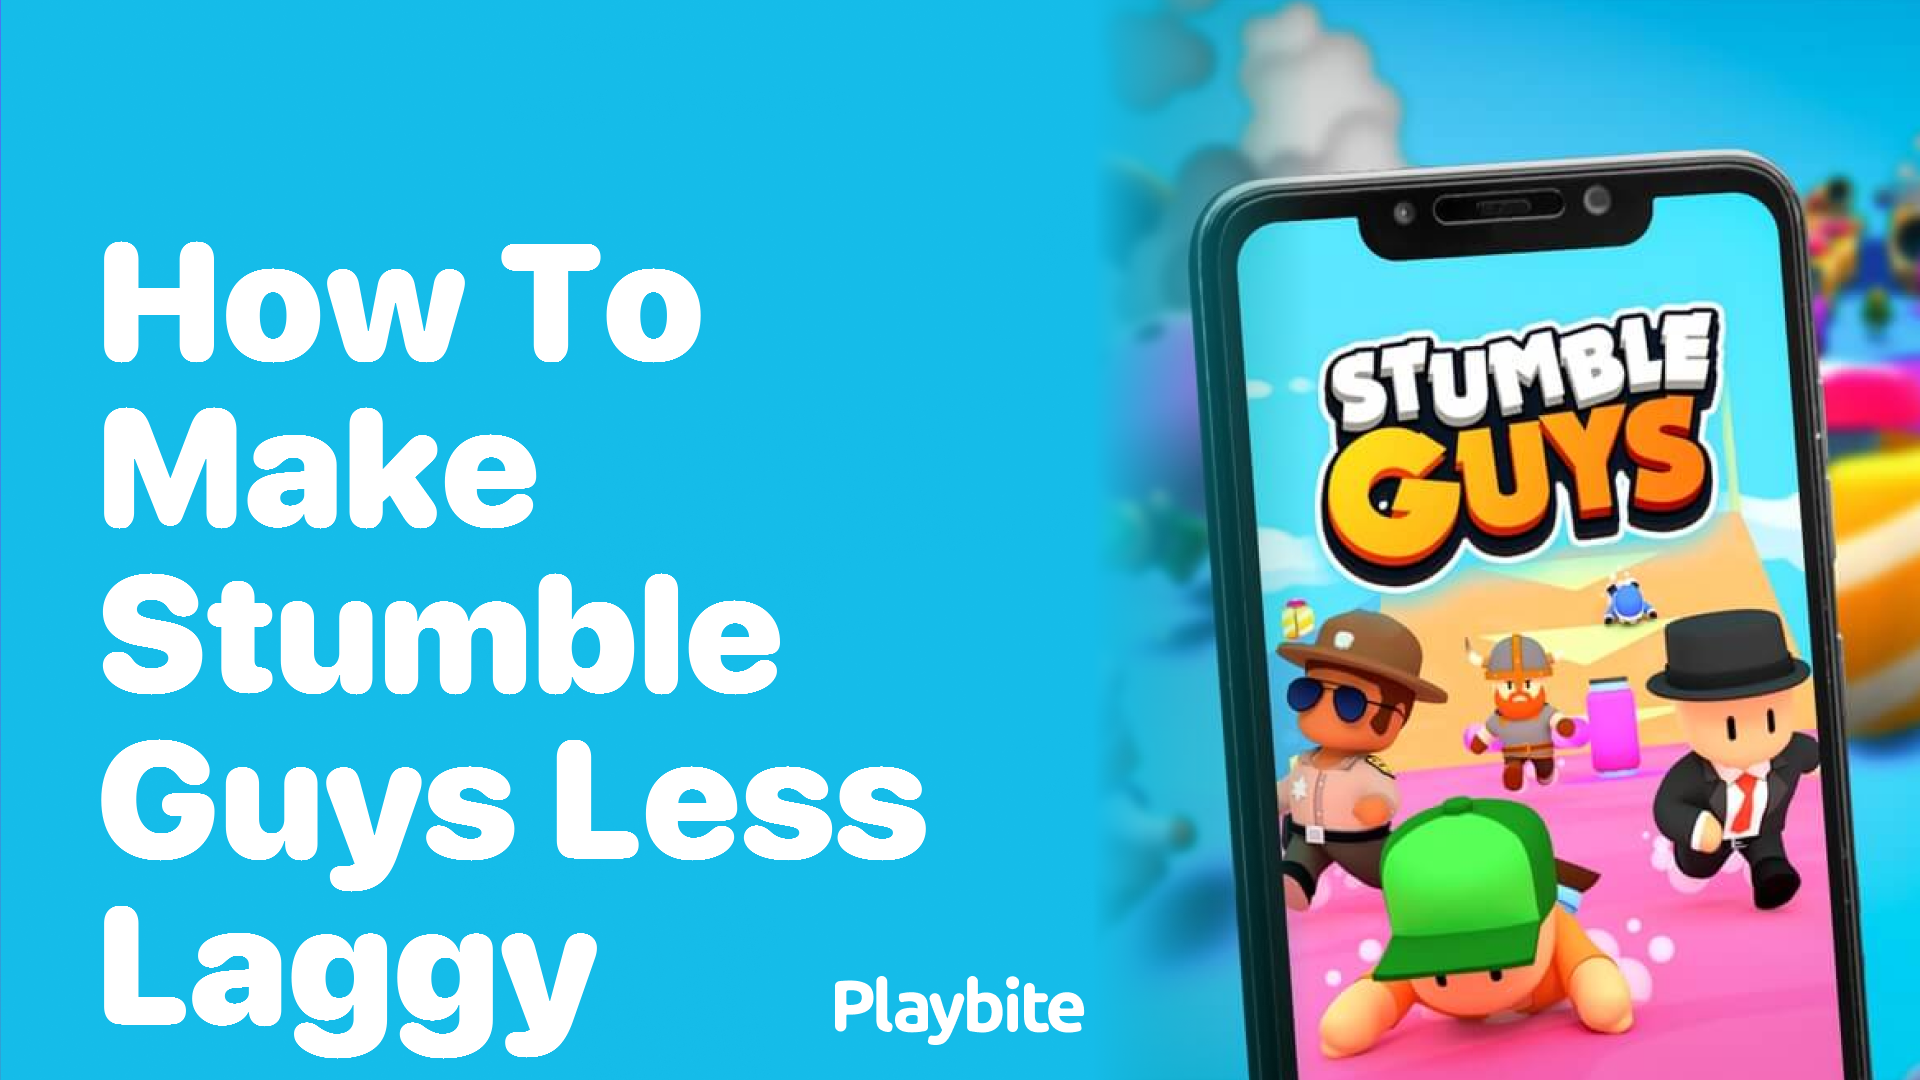 How to Make Stumble Guys Less Laggy for Smoother Gameplay